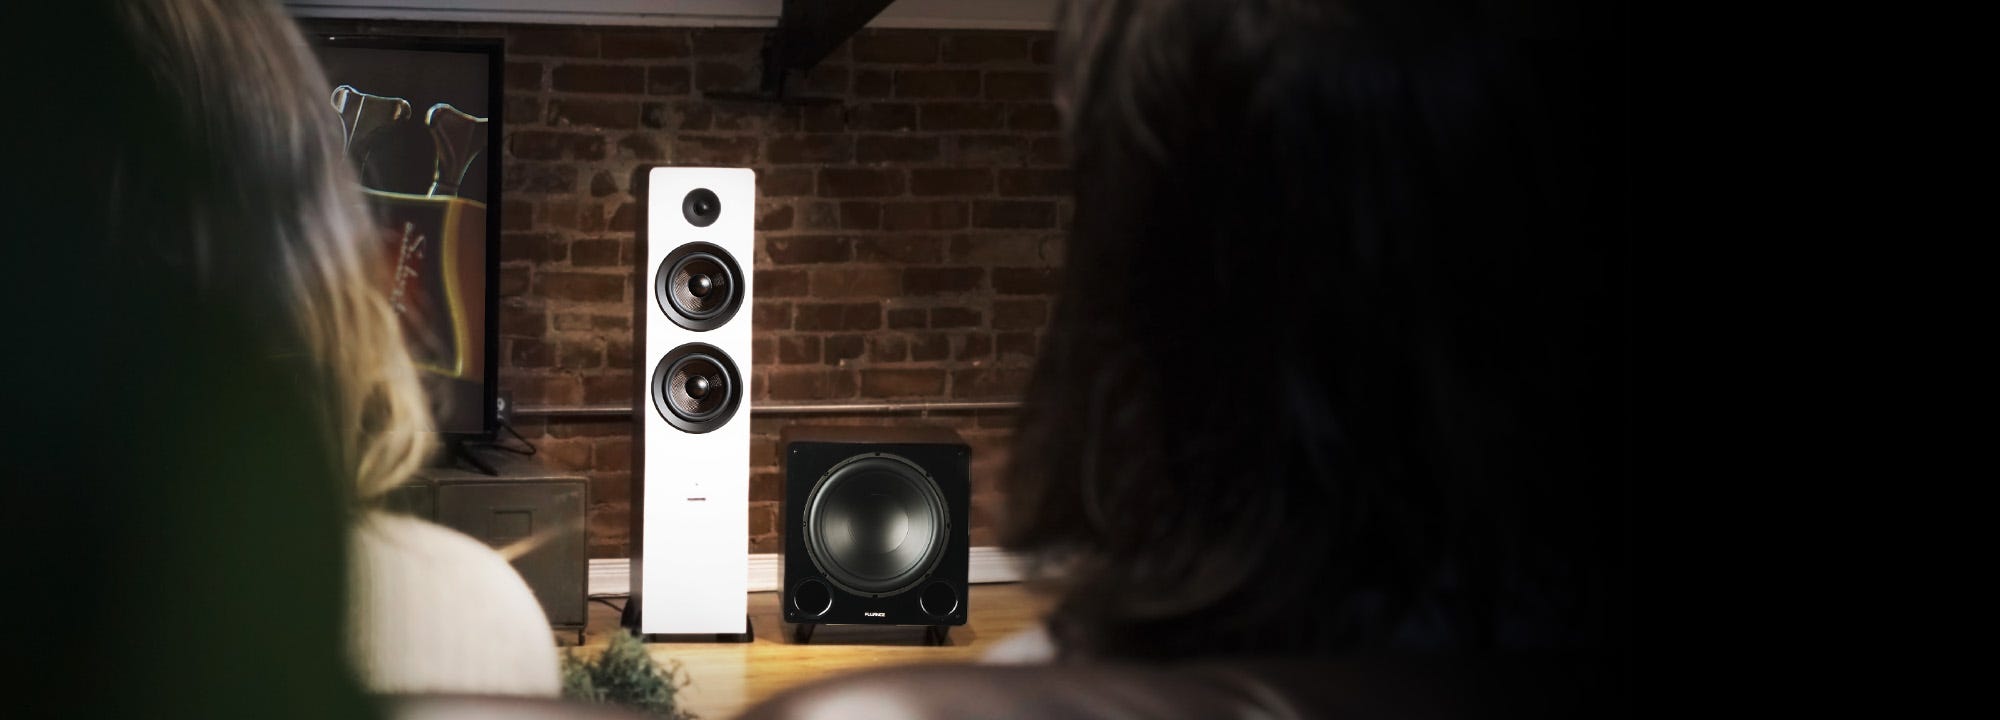 Fluance Ai81 Powered Floorstanding Speaker with DB12 Subwoofer